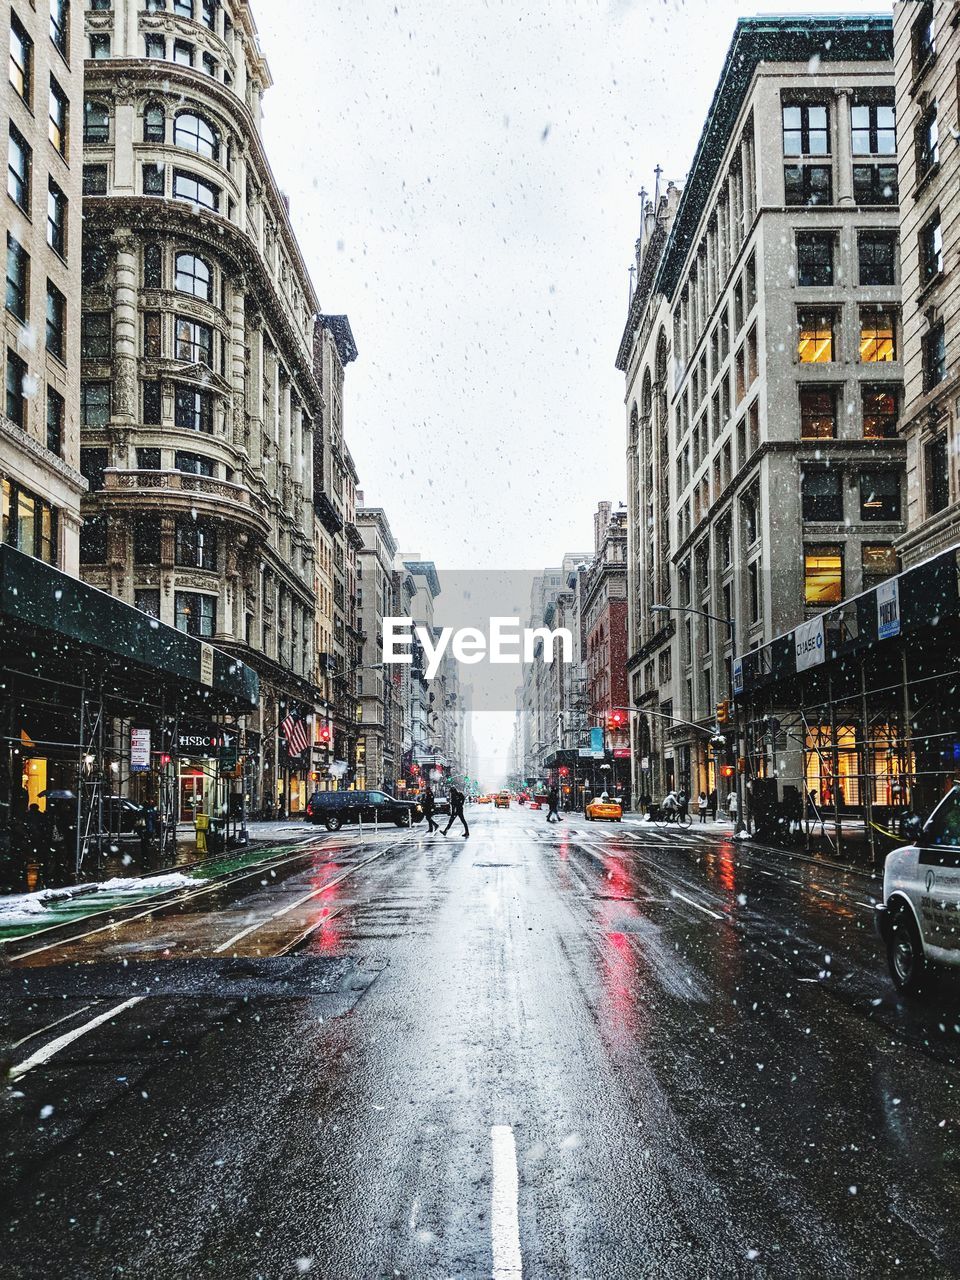 Wet street in city during snowfall